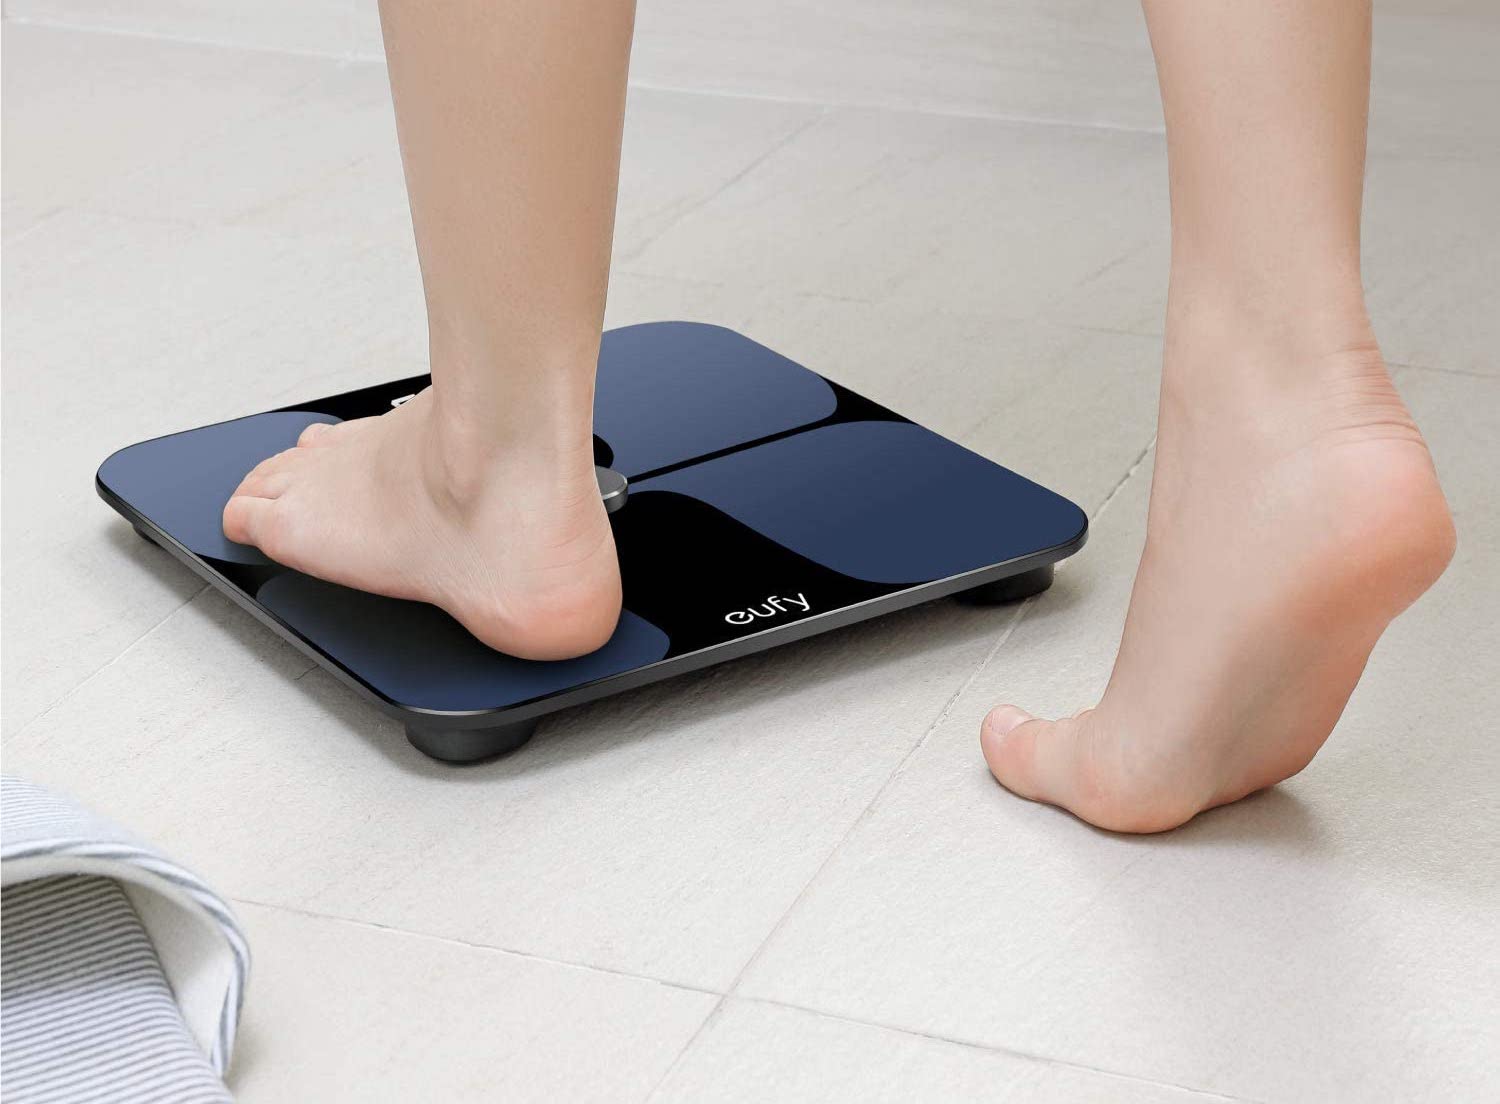 Track your weight, BMI, and more for just $27 with the eufy Smart